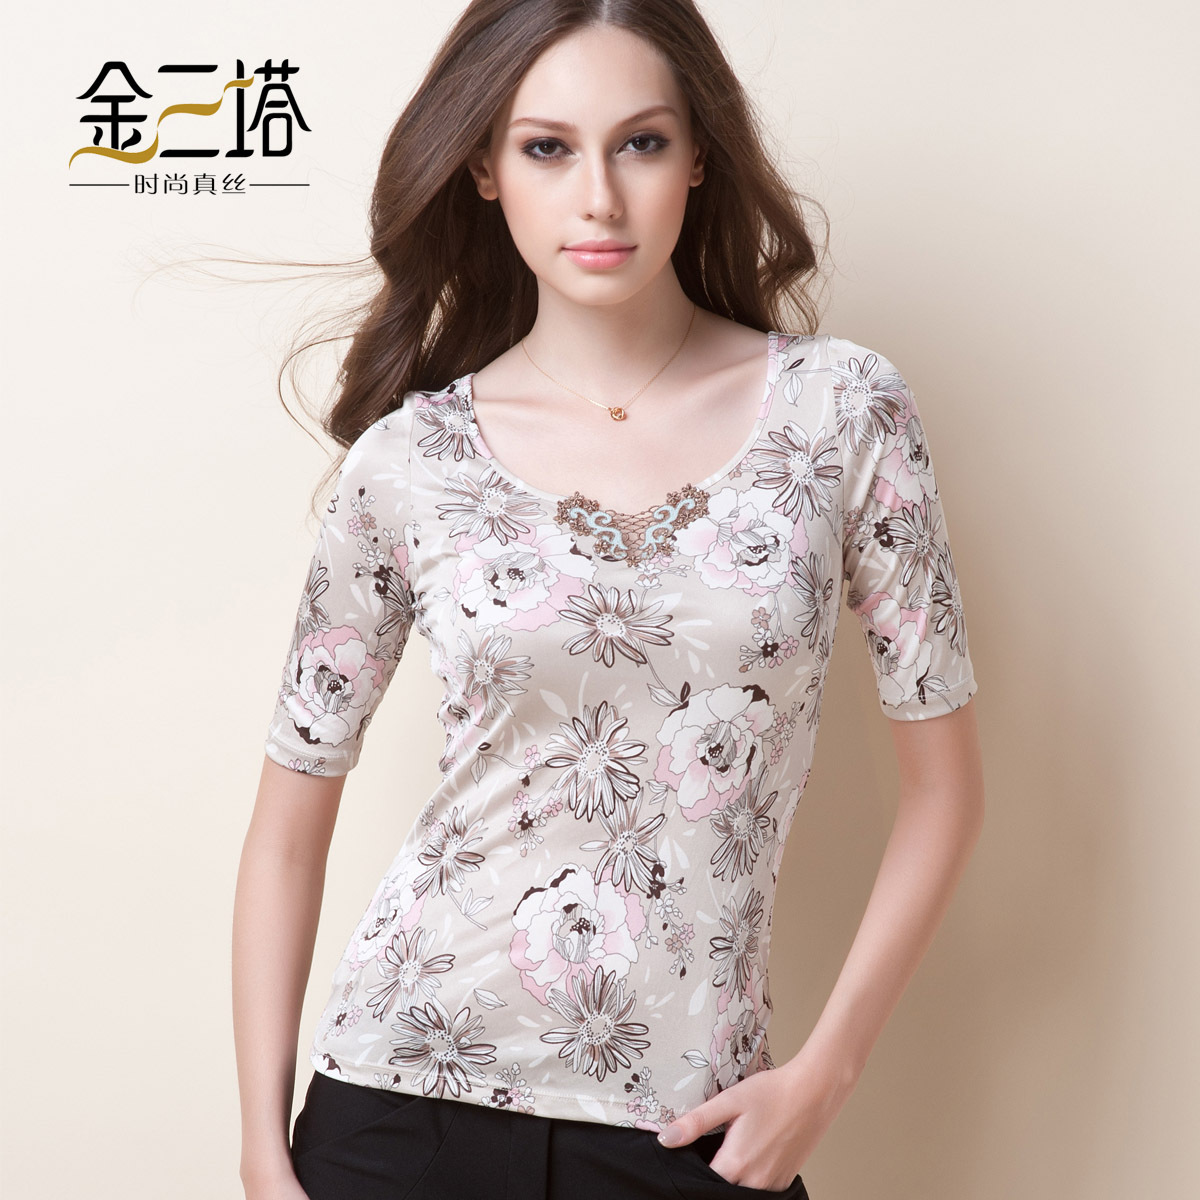 Spring and autumn new arrival mulberry silk basic shirt female silk skin-friendly half sleeve top